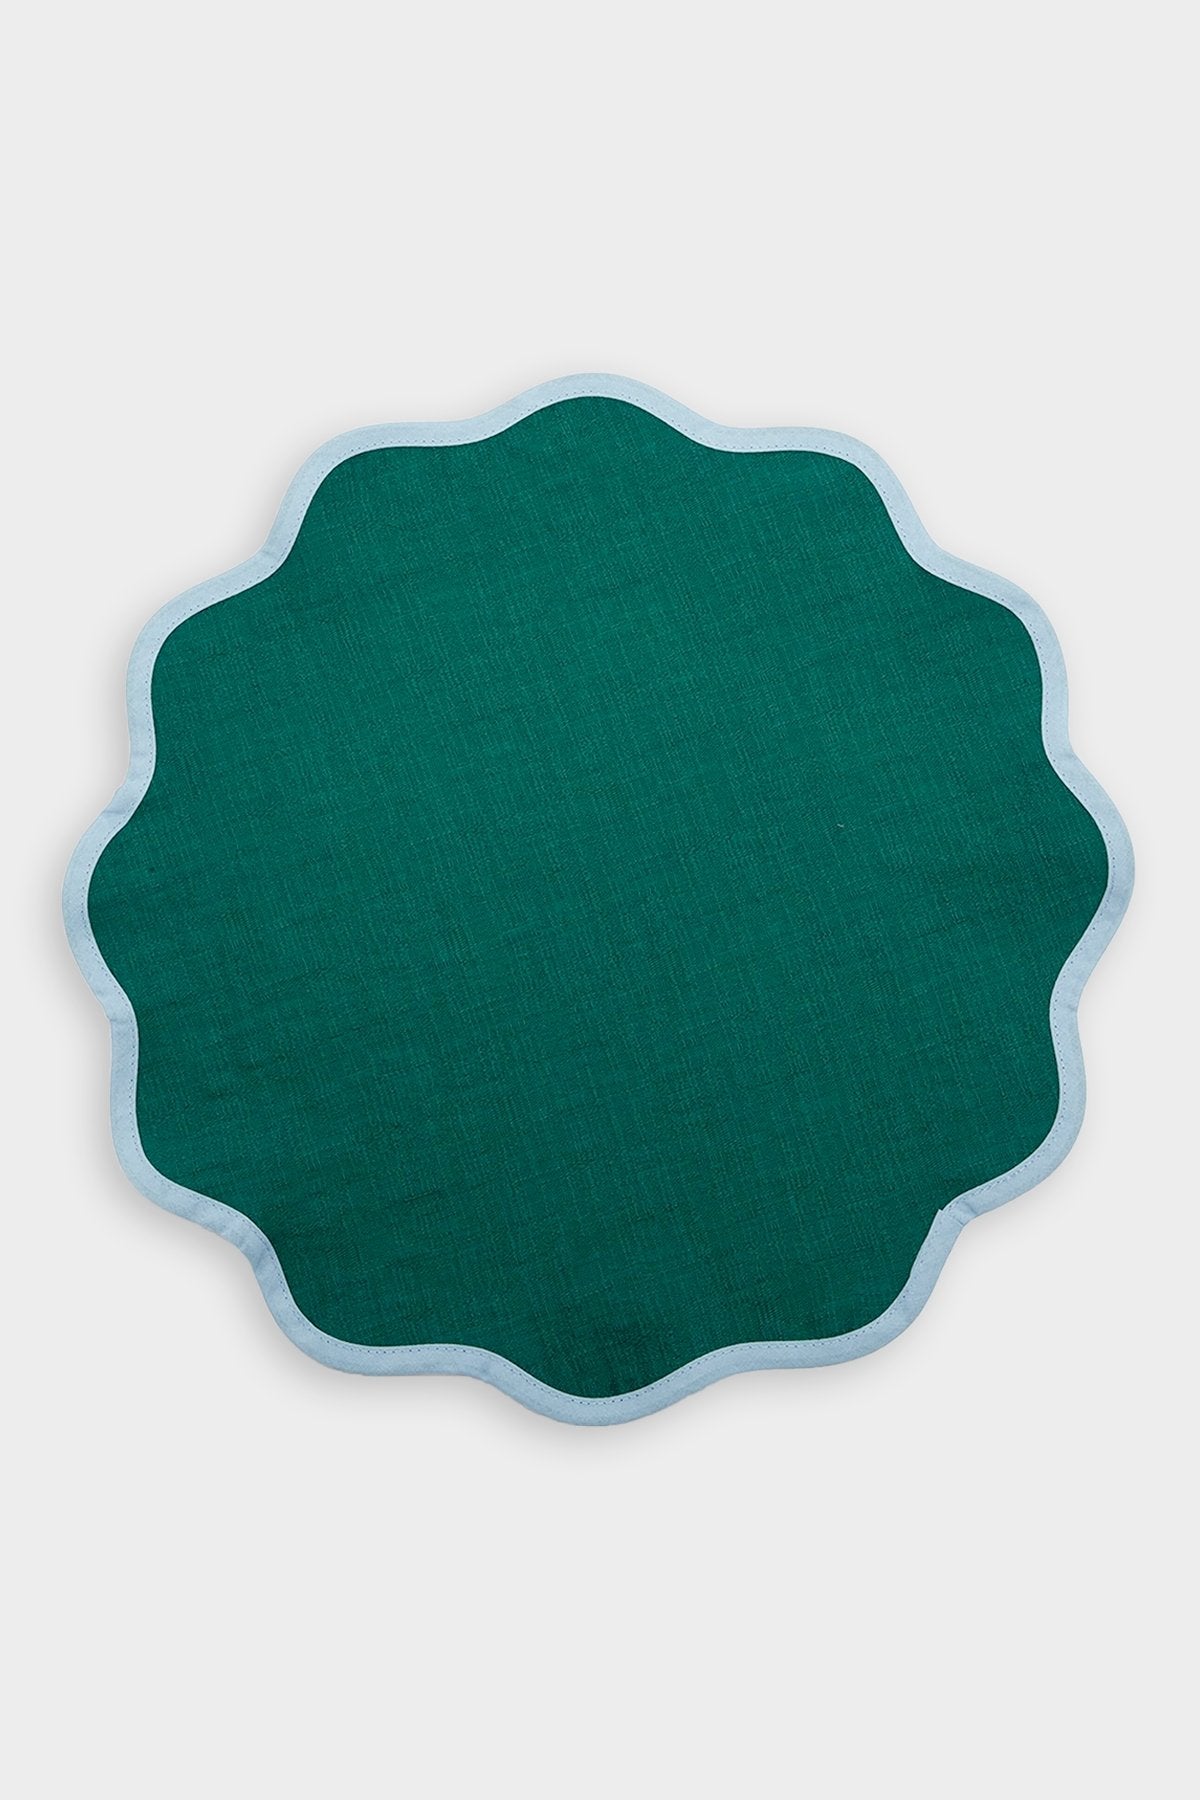 Scalloped Tablemats in Green - shop-olivia.com